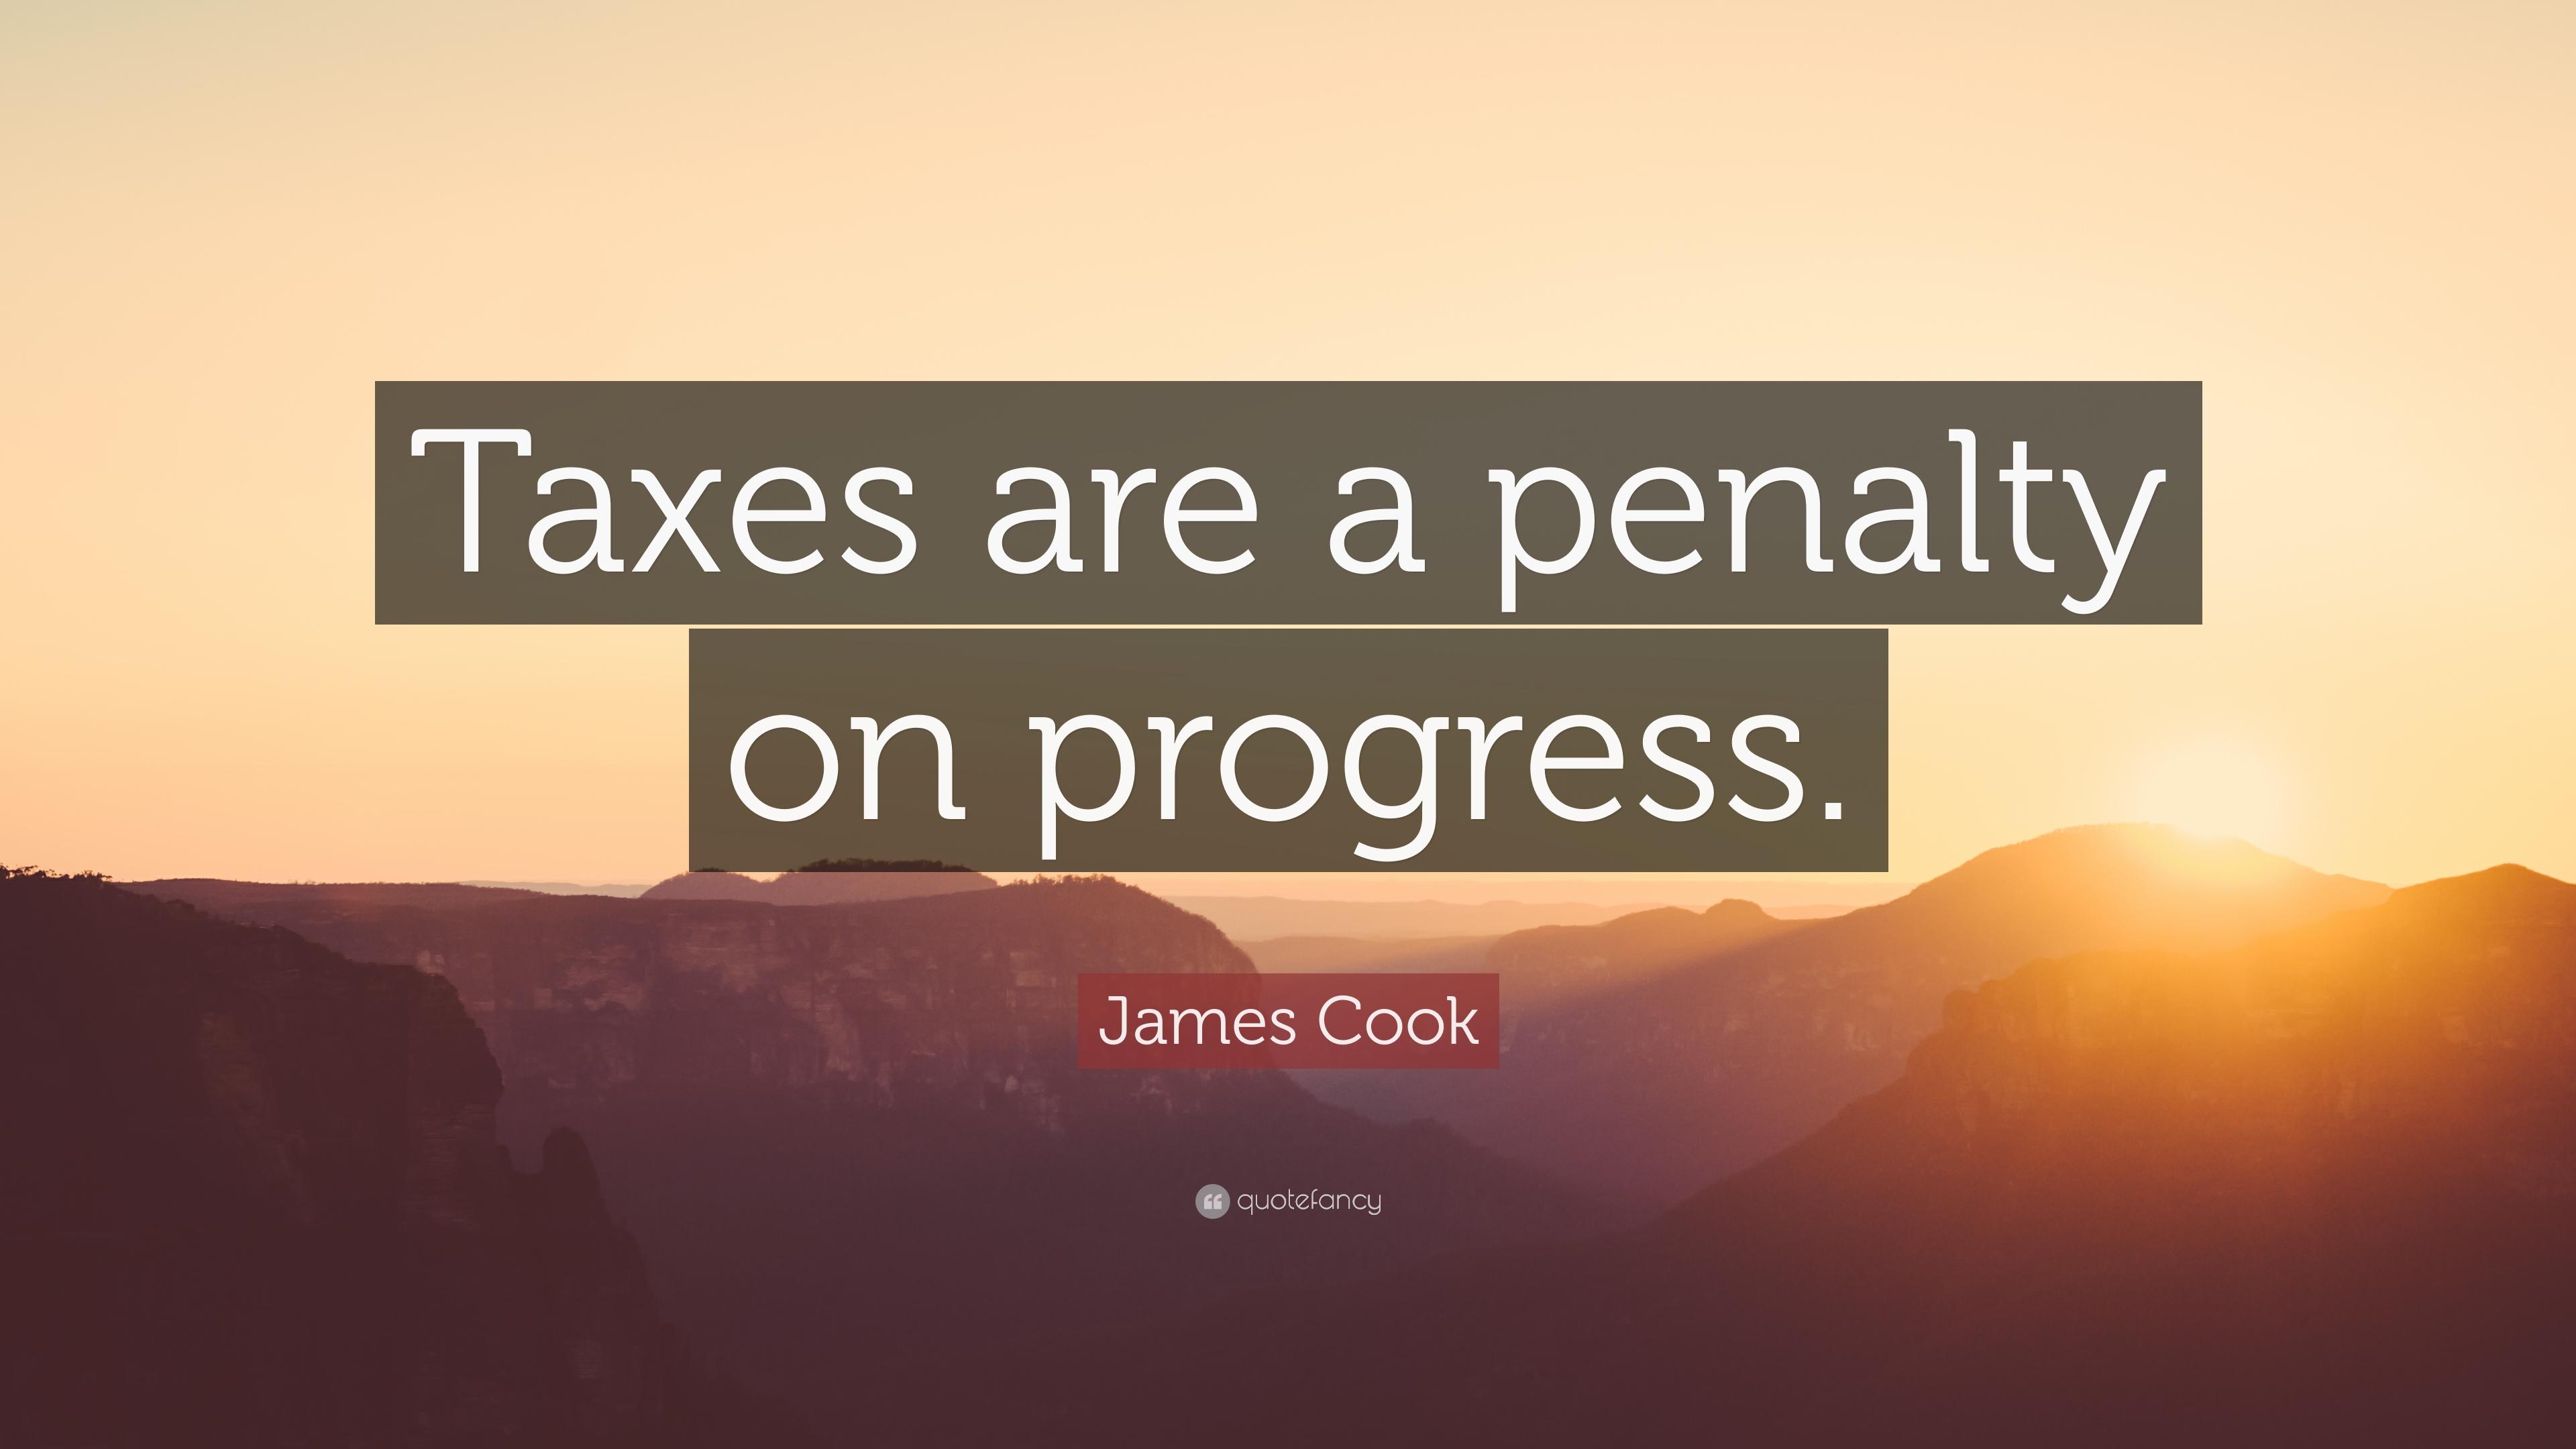 James Cook Quote: “Taxes are a penalty on progress.” (9 wallpaper)